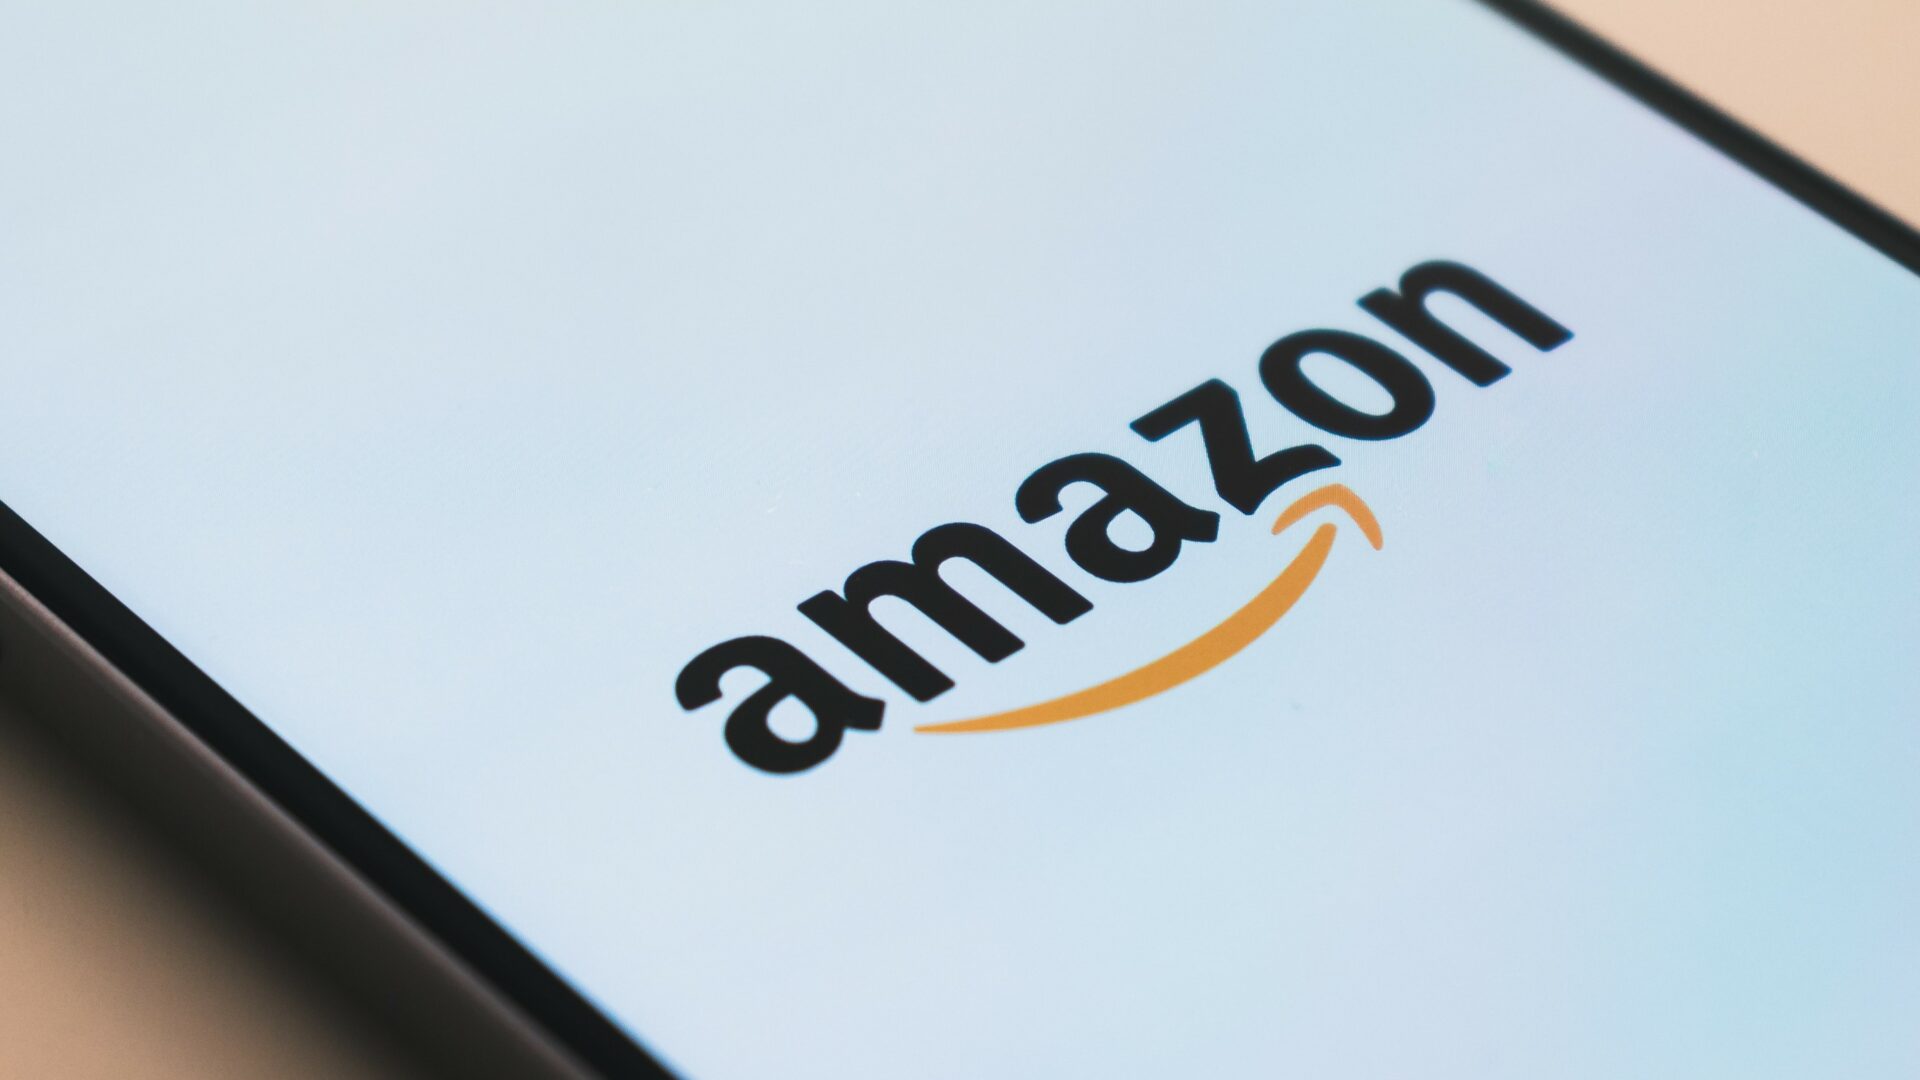 Amazon Live 101: How to Live Stream Products